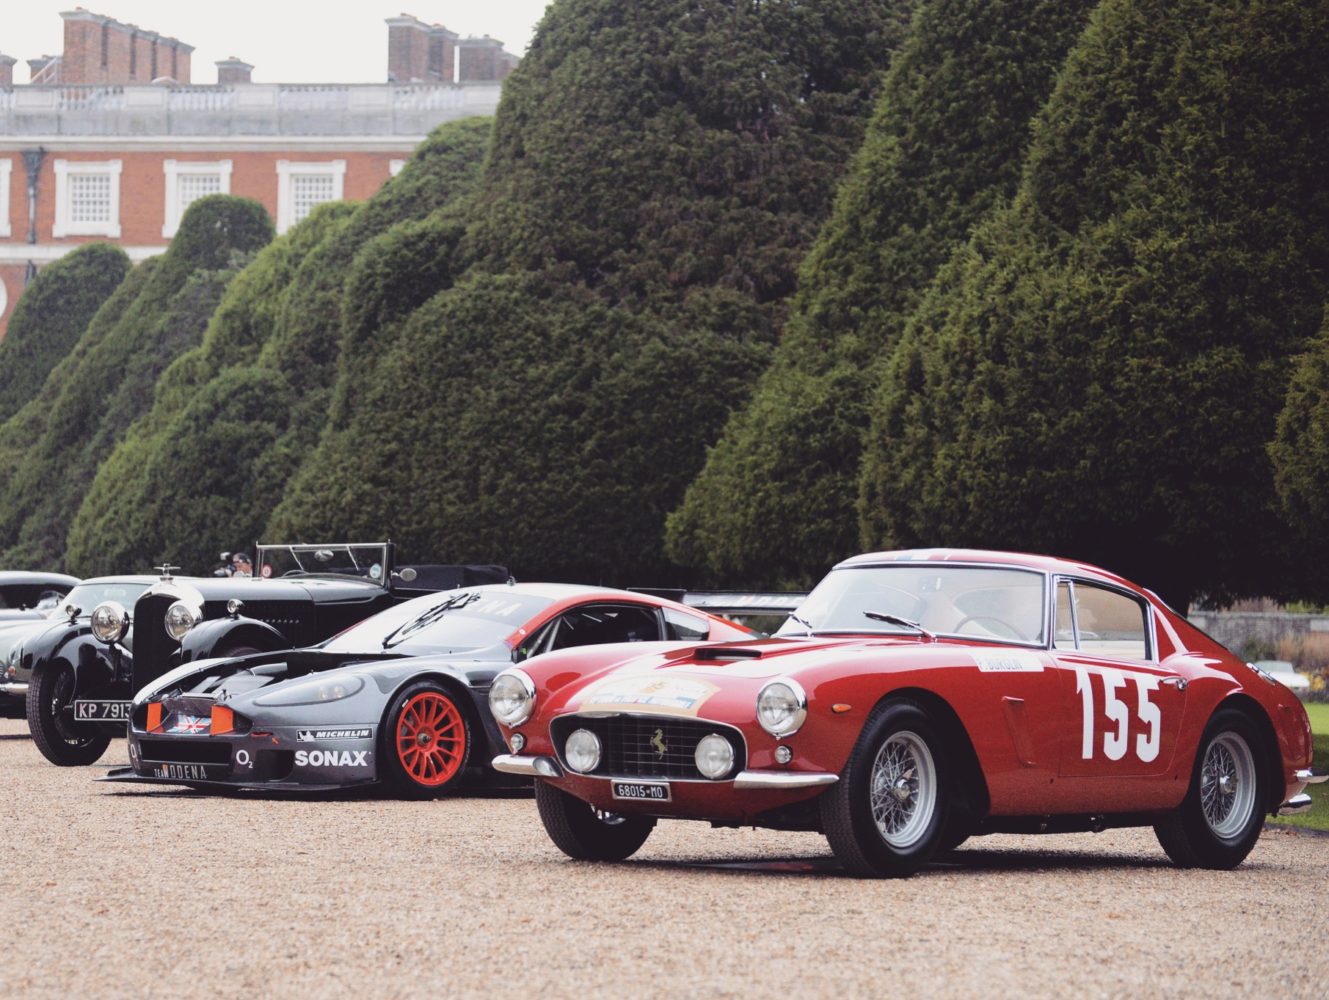 Concours of Elegance Returns to Hampton Court Palace